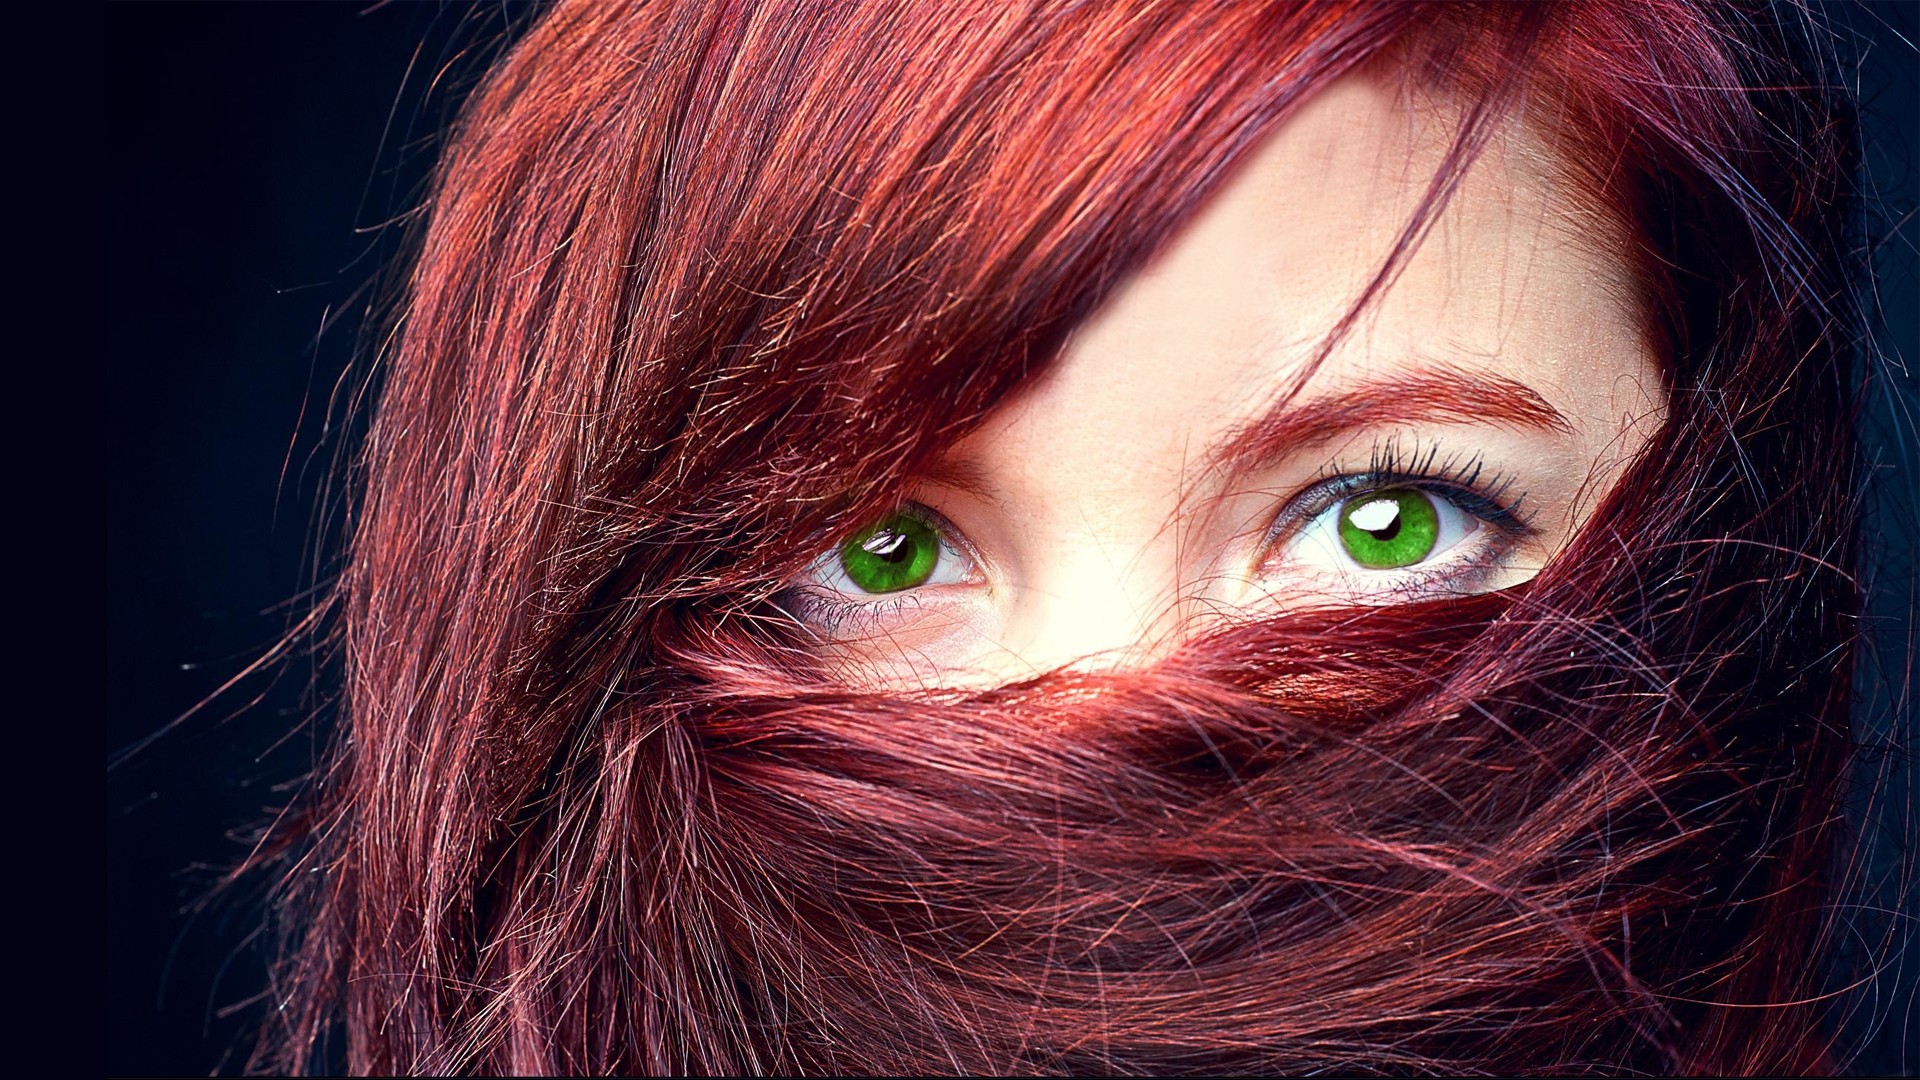 People 1920x1080 green eyes face women redhead hair in face model closeup looking at viewer eyes